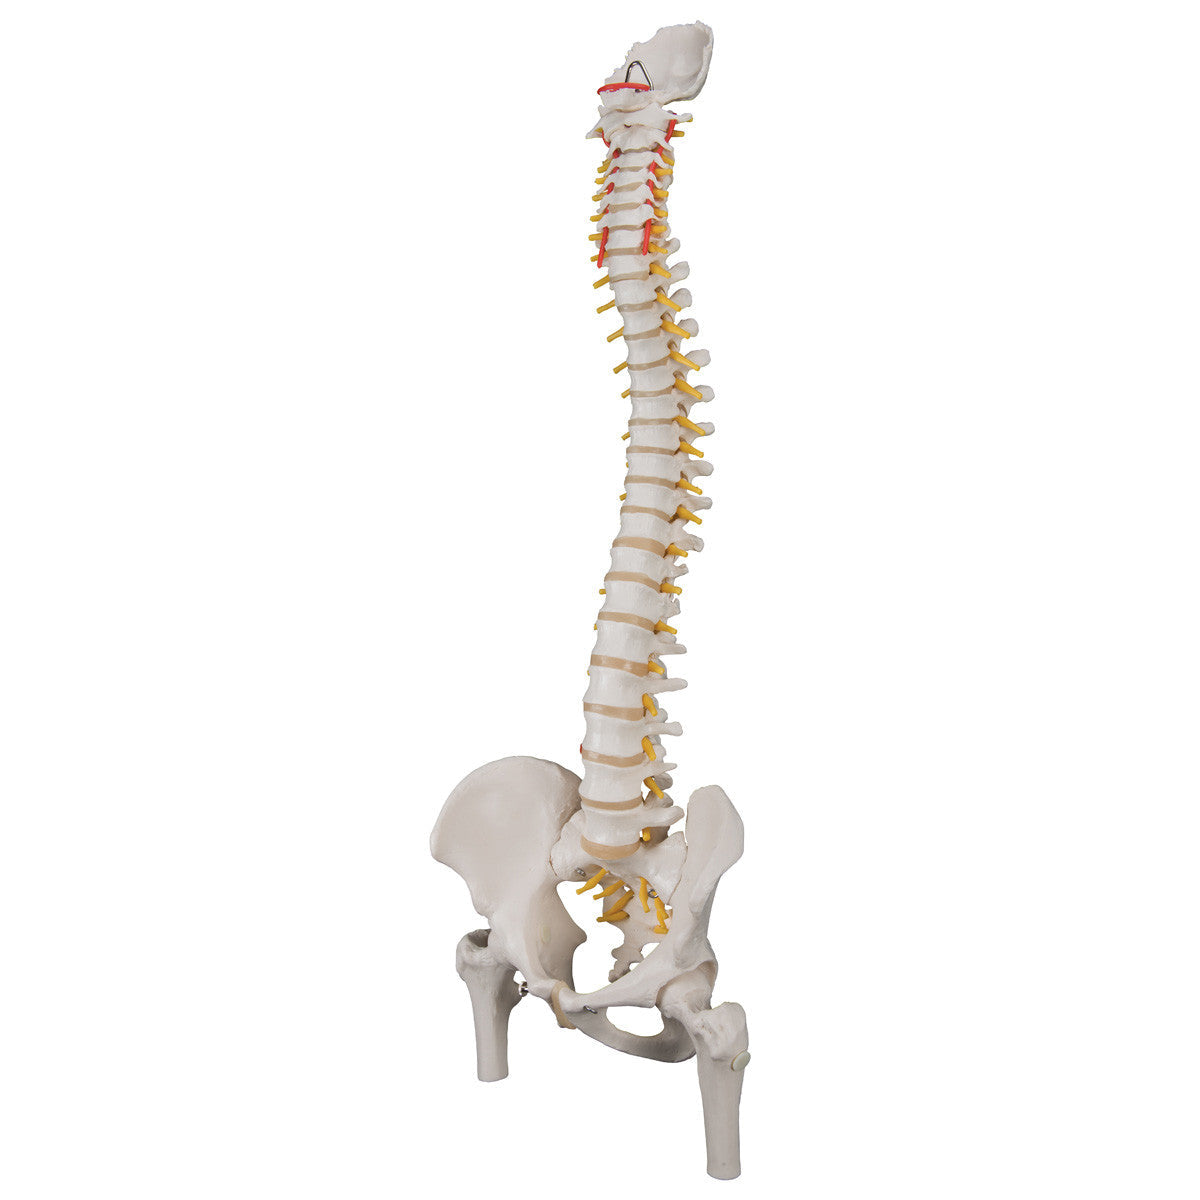 Flexible spine with femur heads